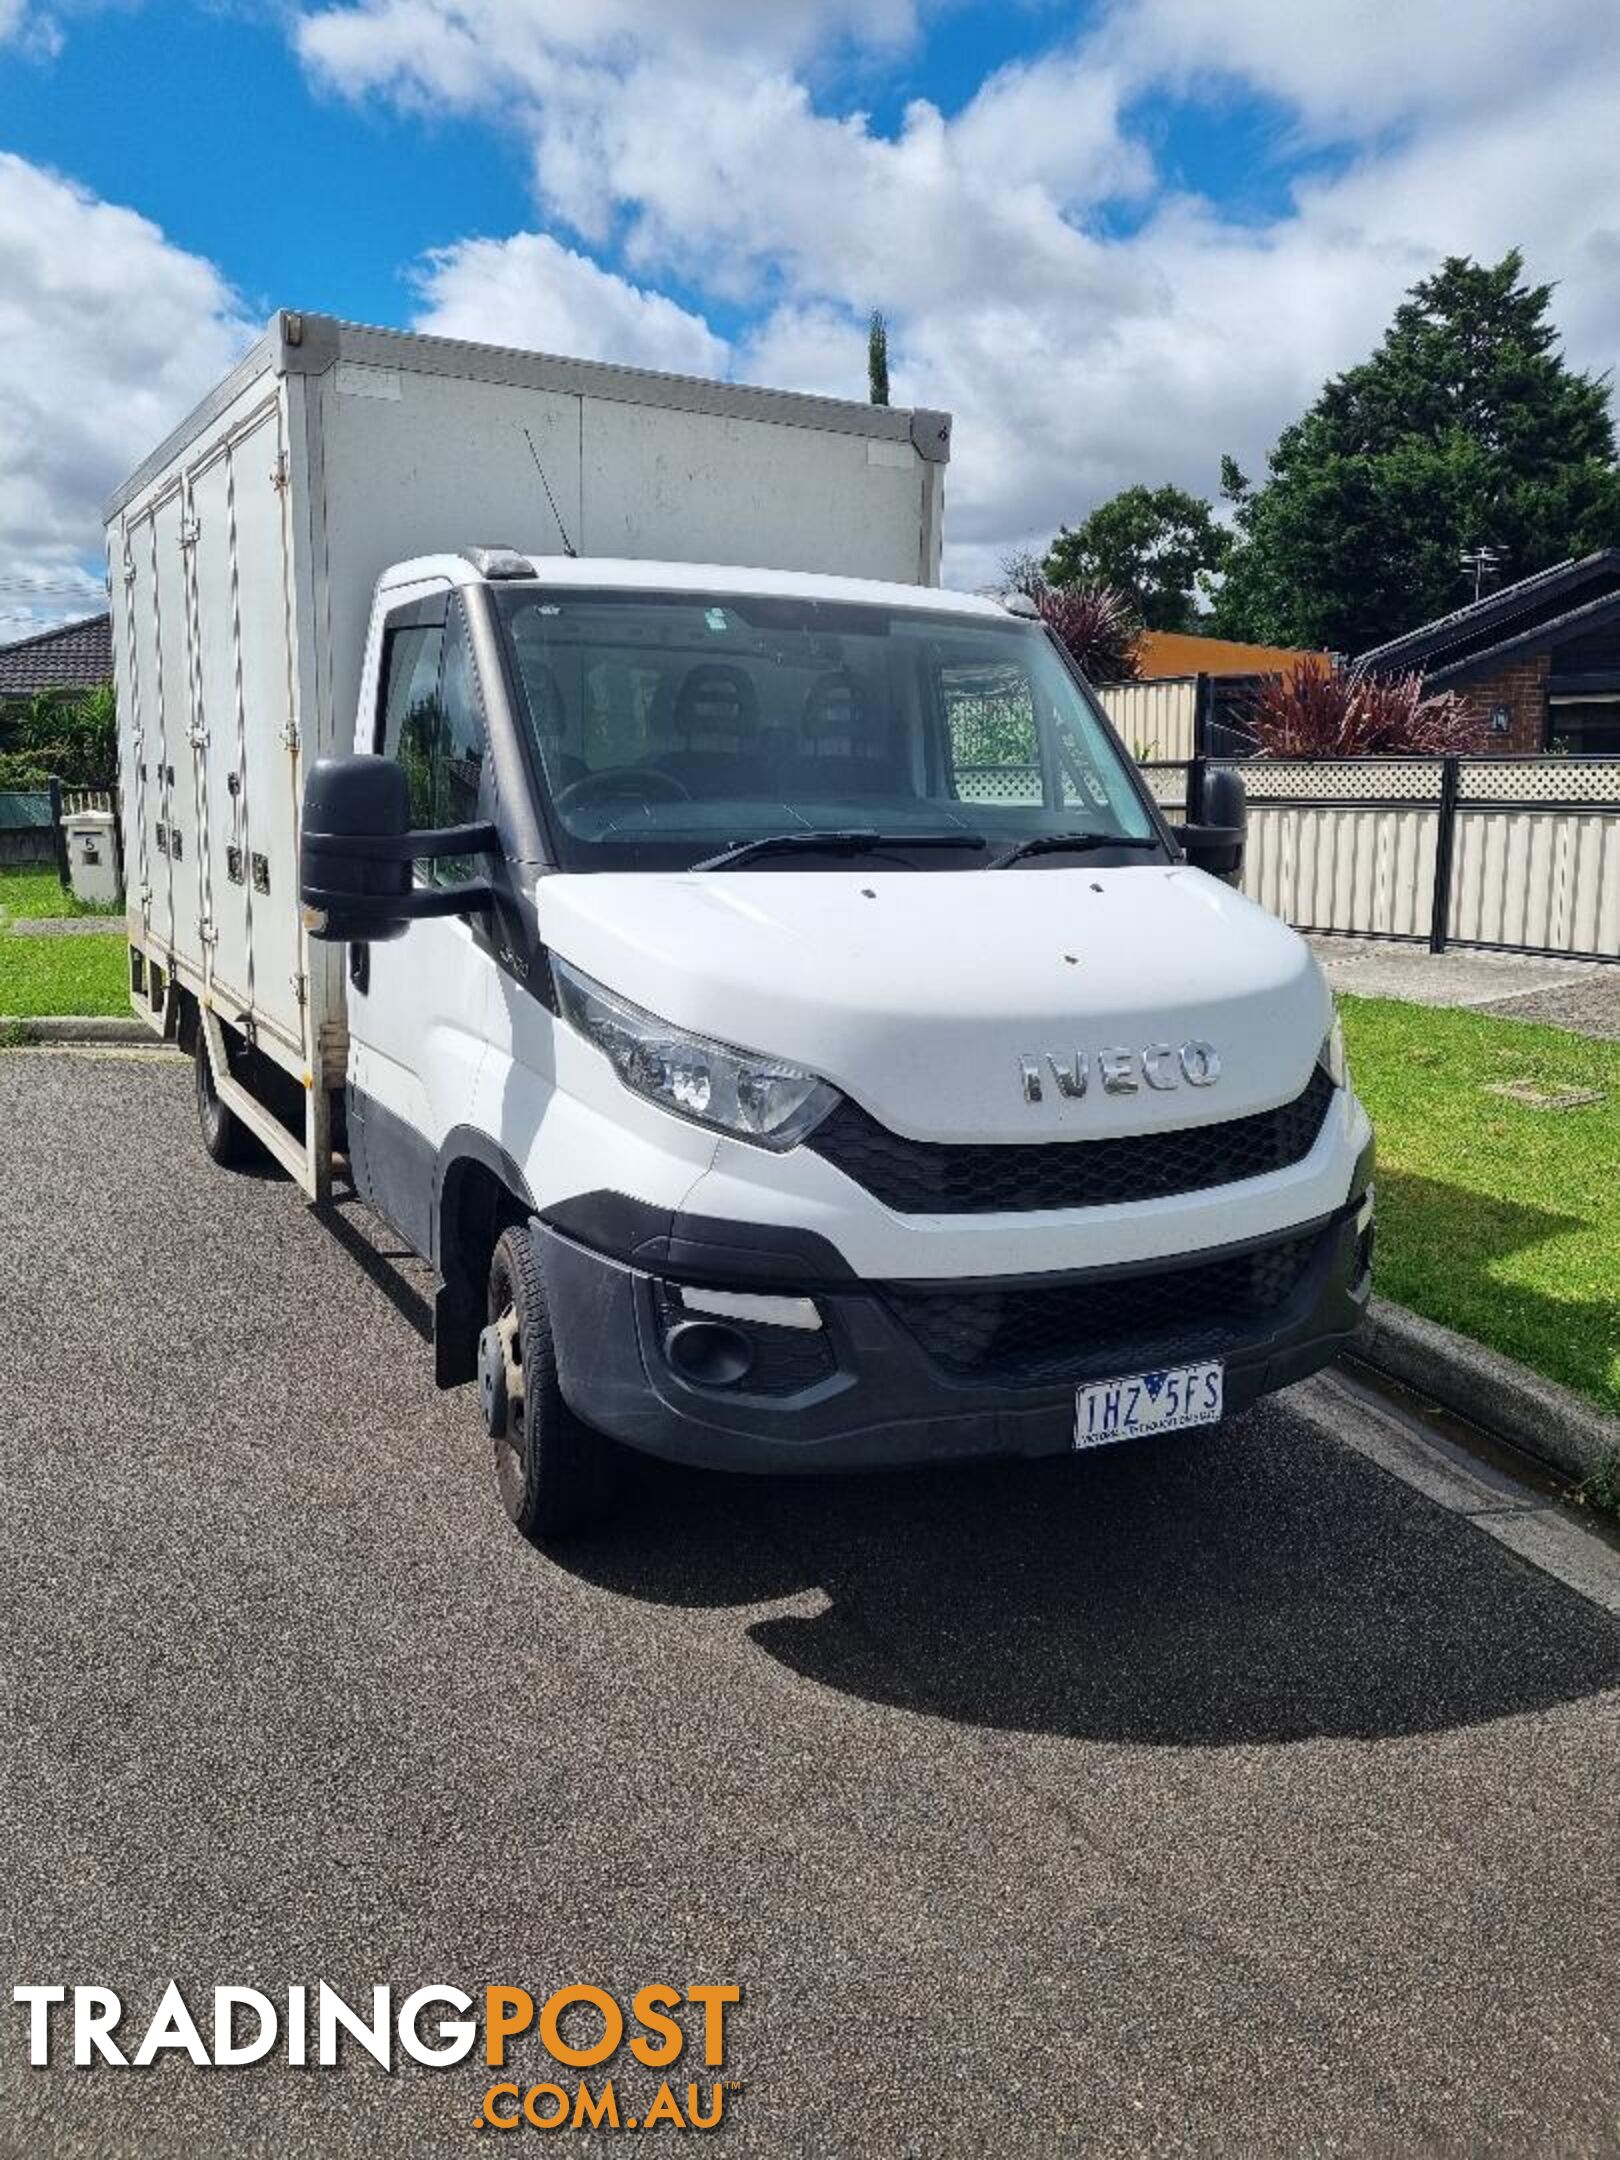 IVECO DAILY LIGHT TRUCK